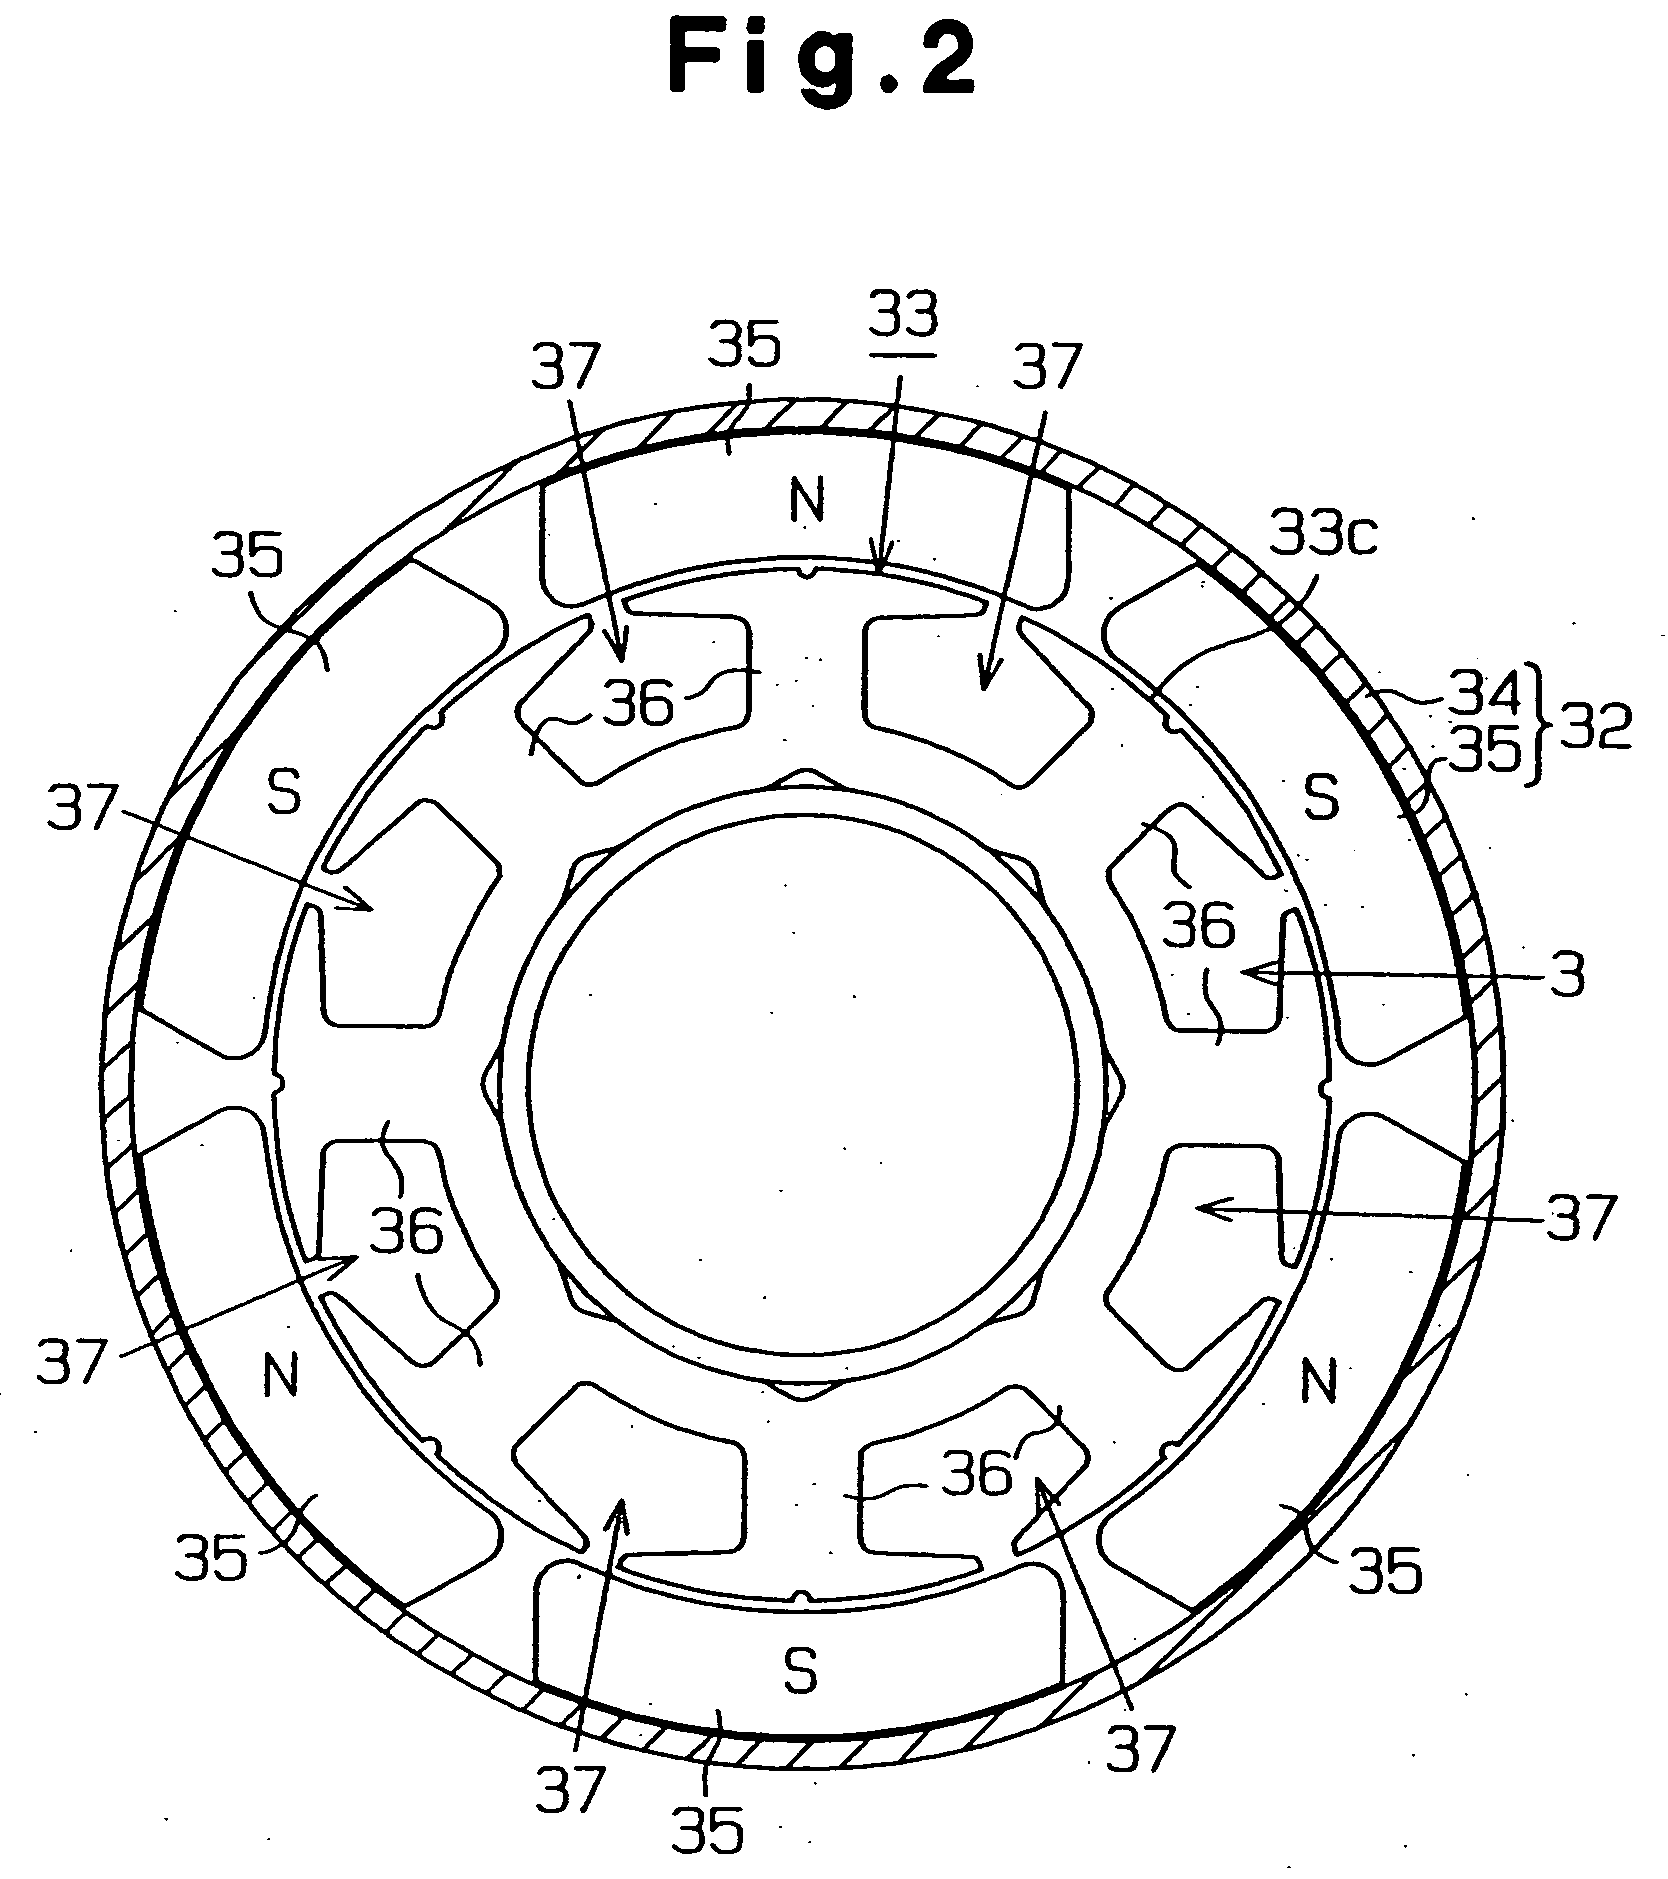 Core of rotation apparatus, method for manufacturing core, and rotation apparatus